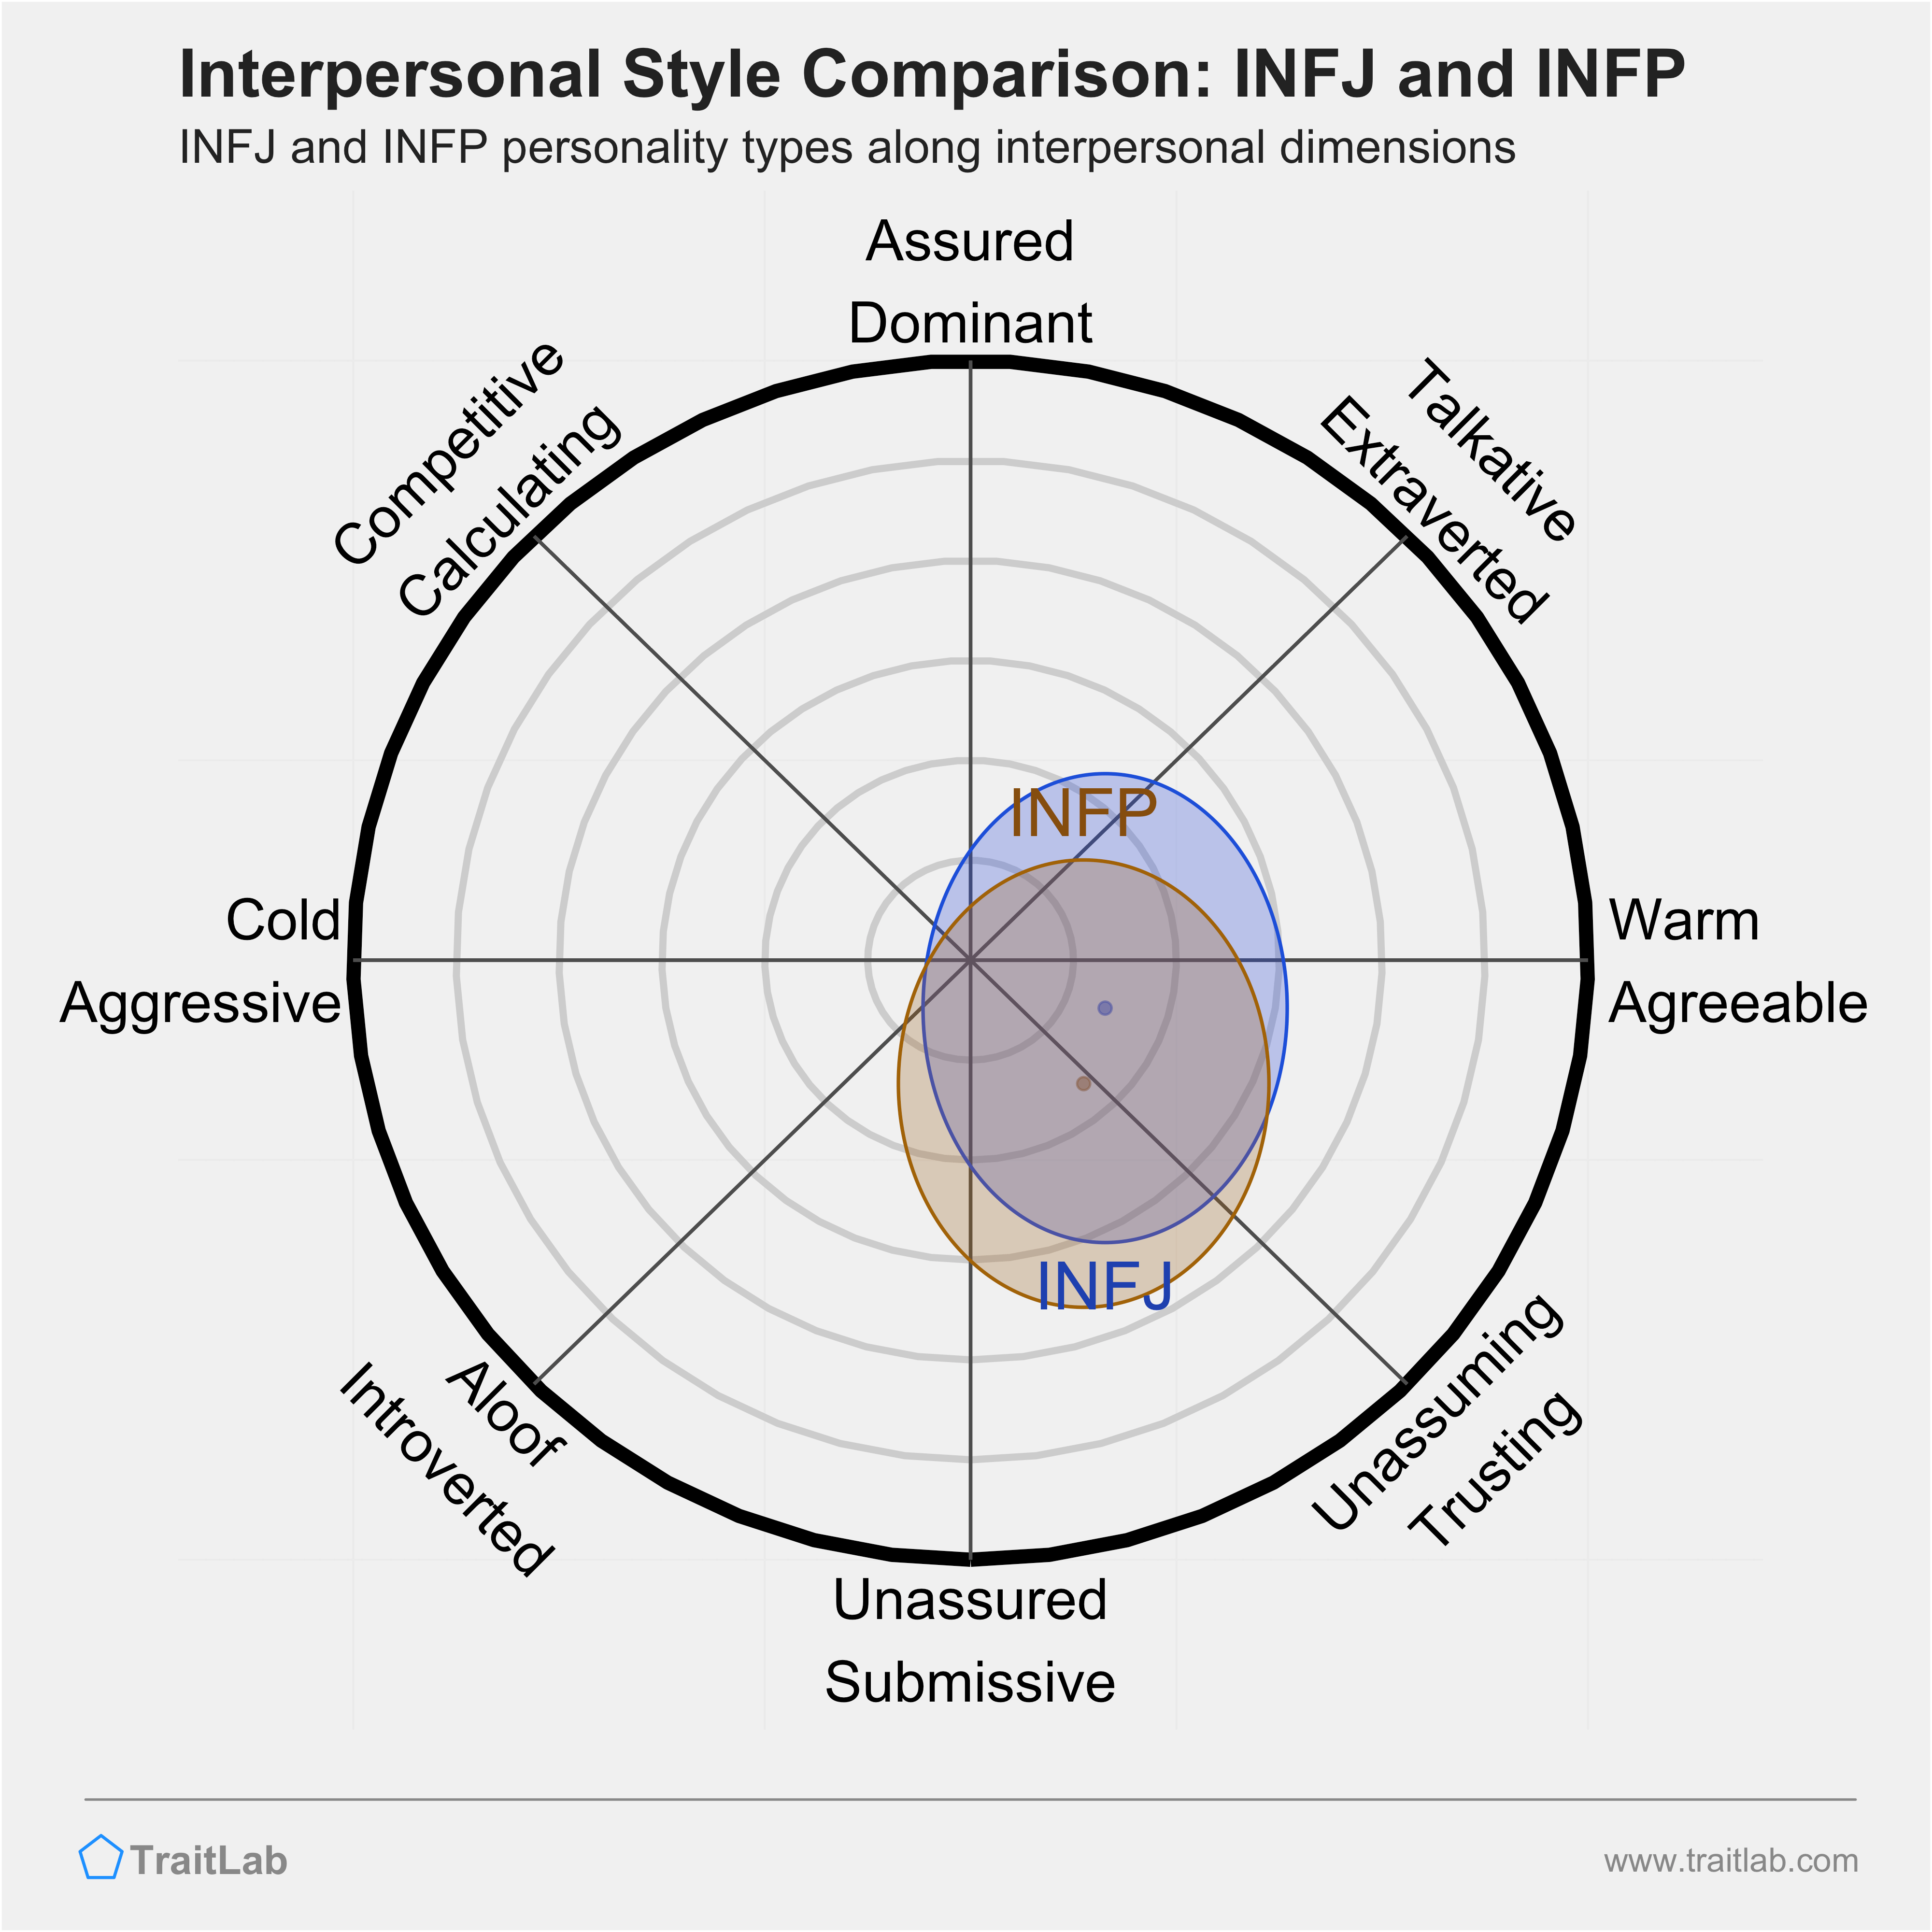 Lulu MBTI Personality Type: INFP or INFJ?